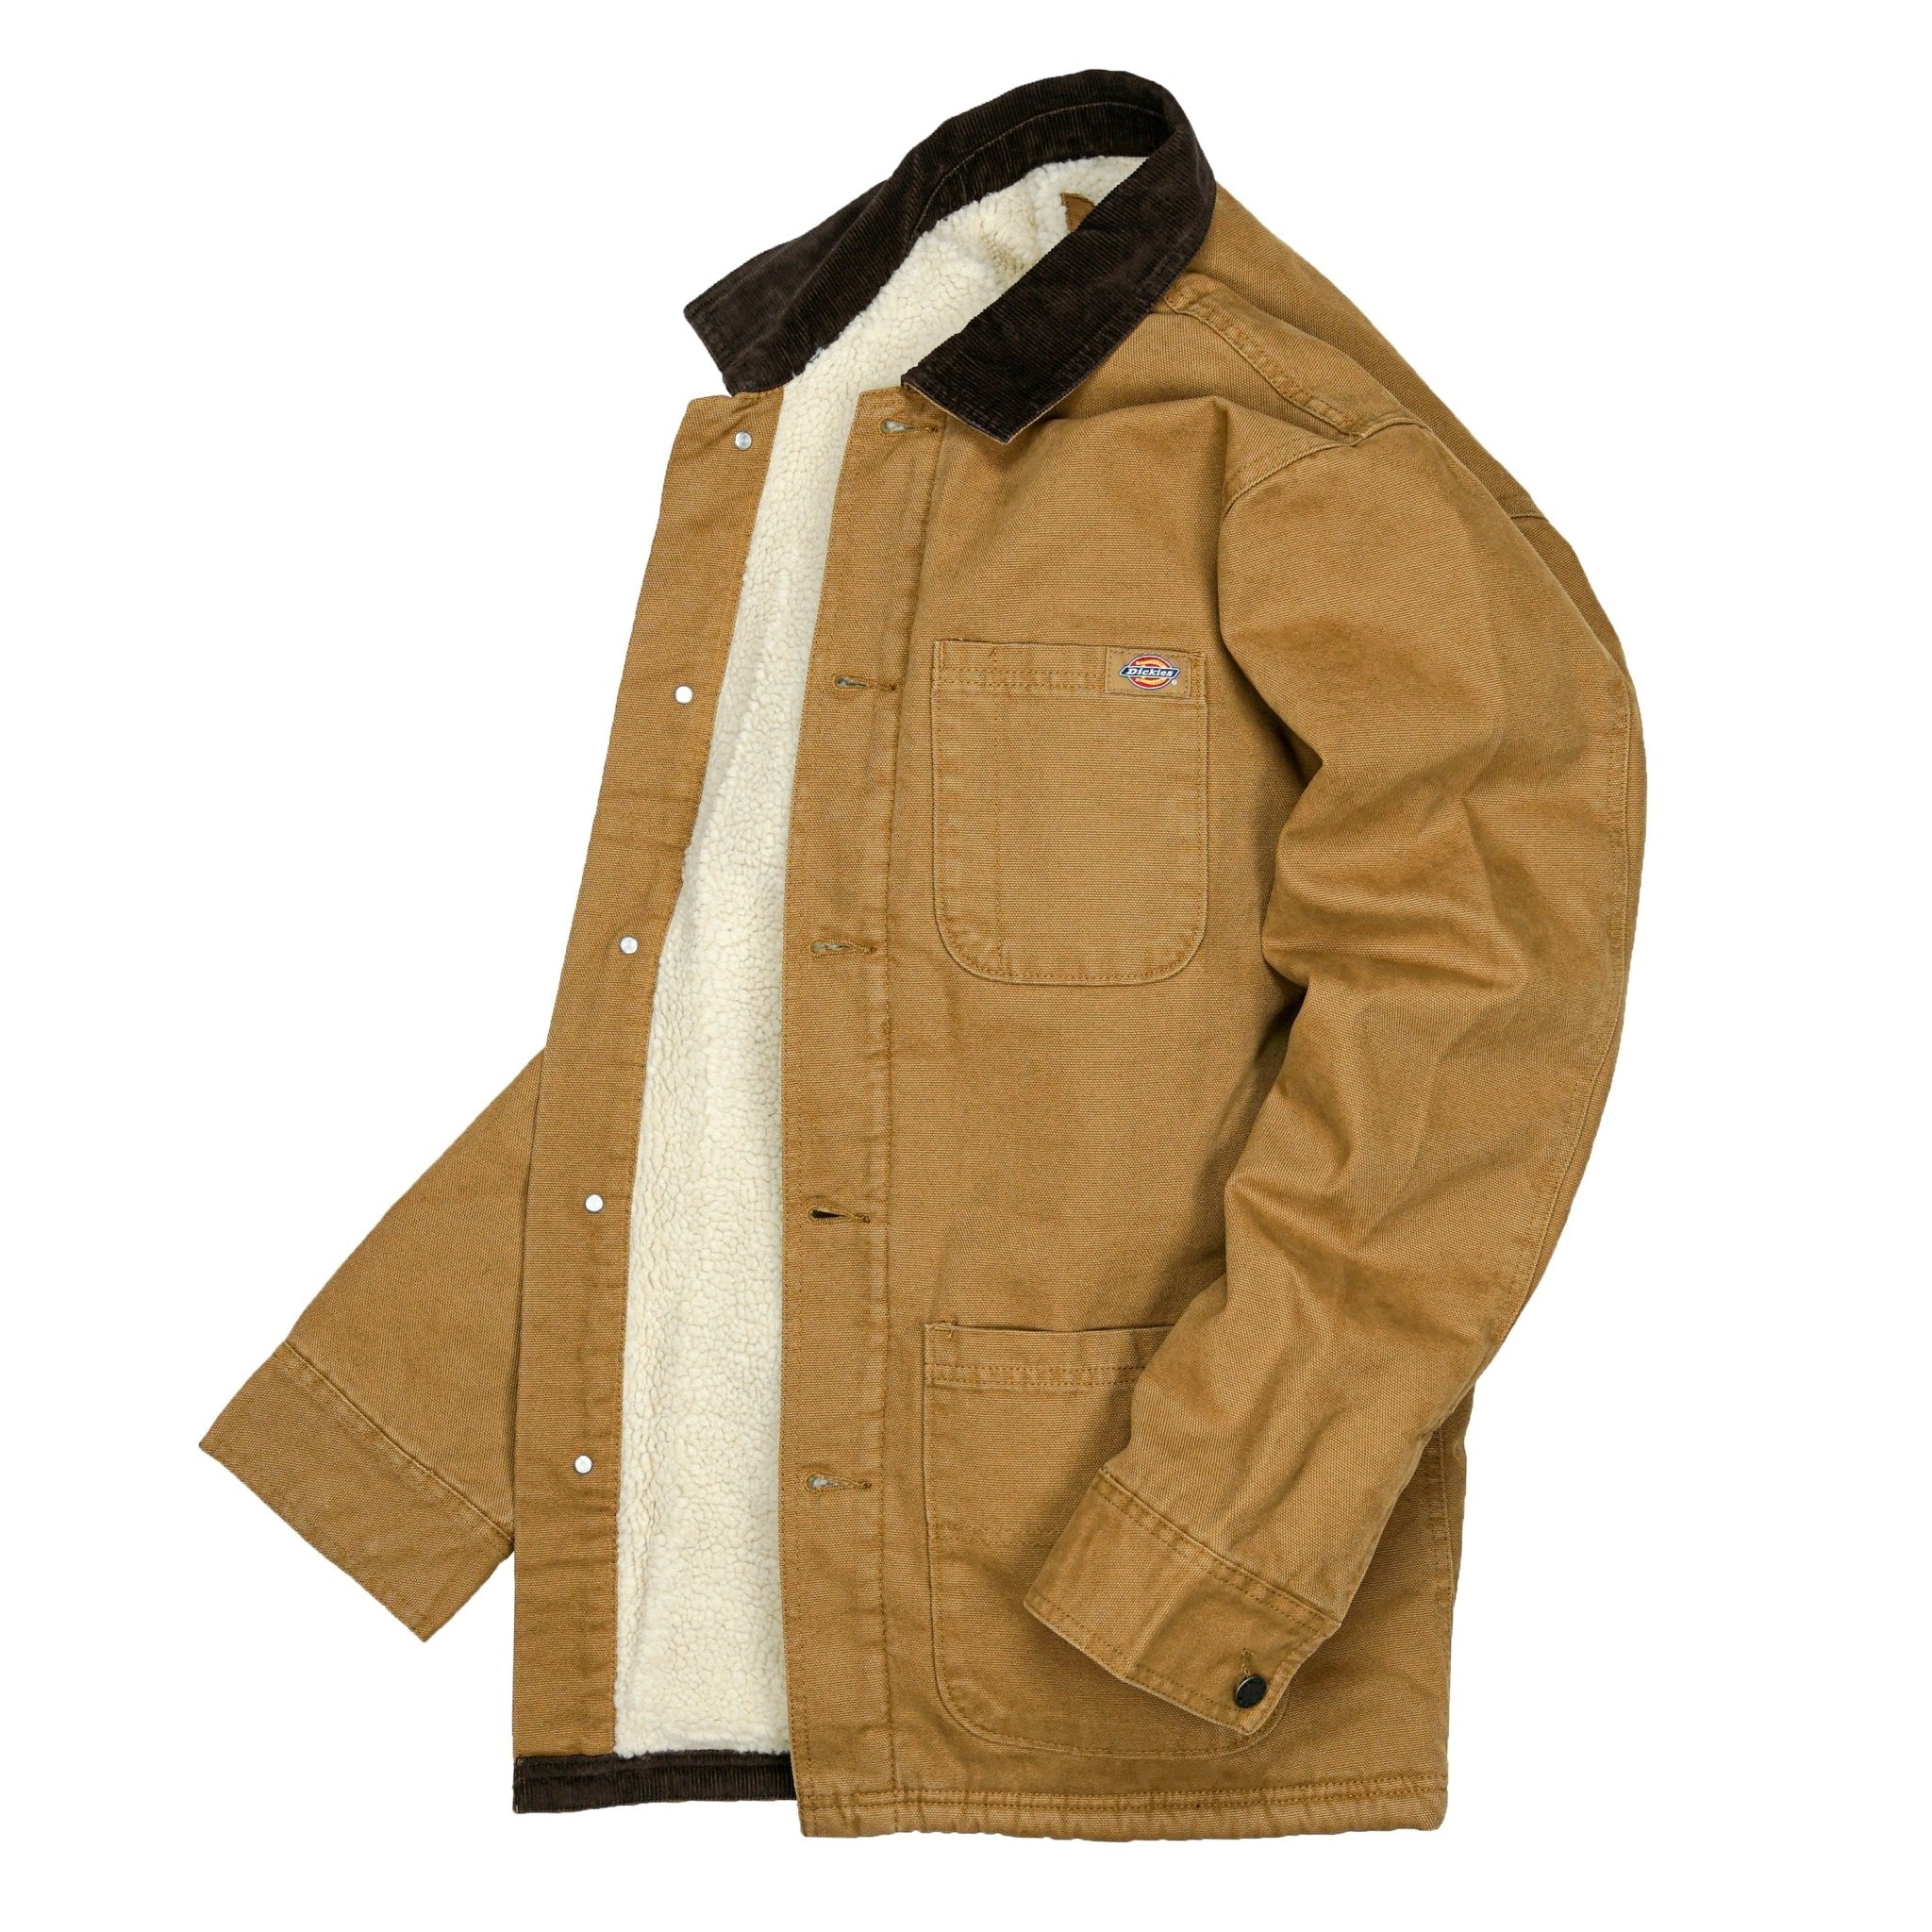 Duck Canvas Chore Coat in stonewashed brown duck - Dickies - State Of Flux